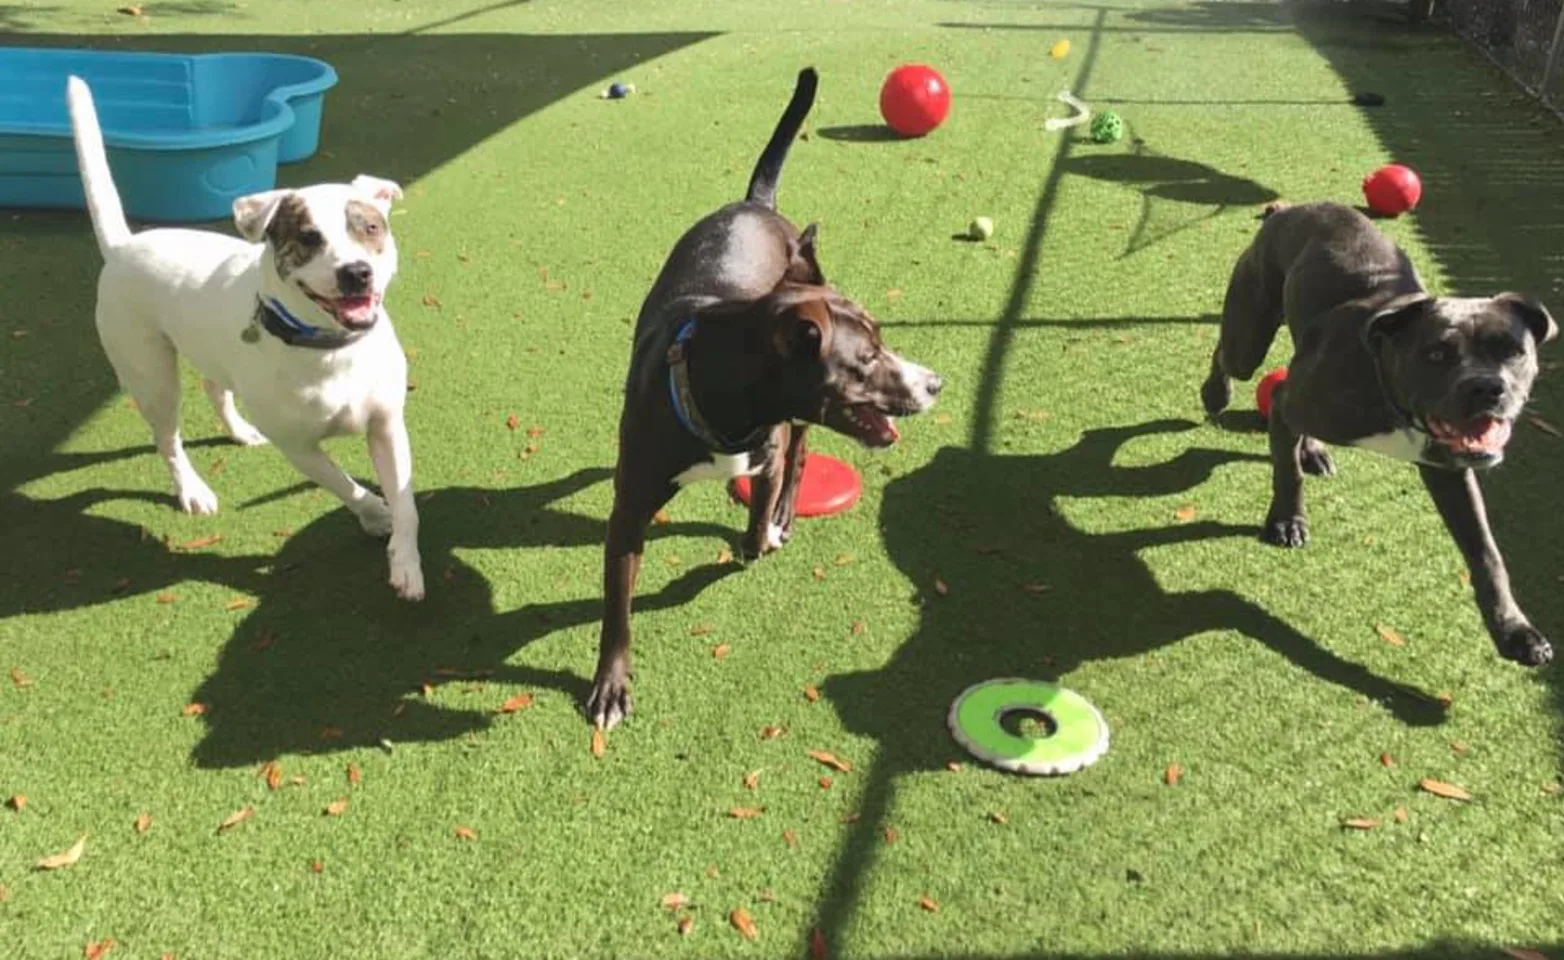 3 dogs playing on artificial turf area